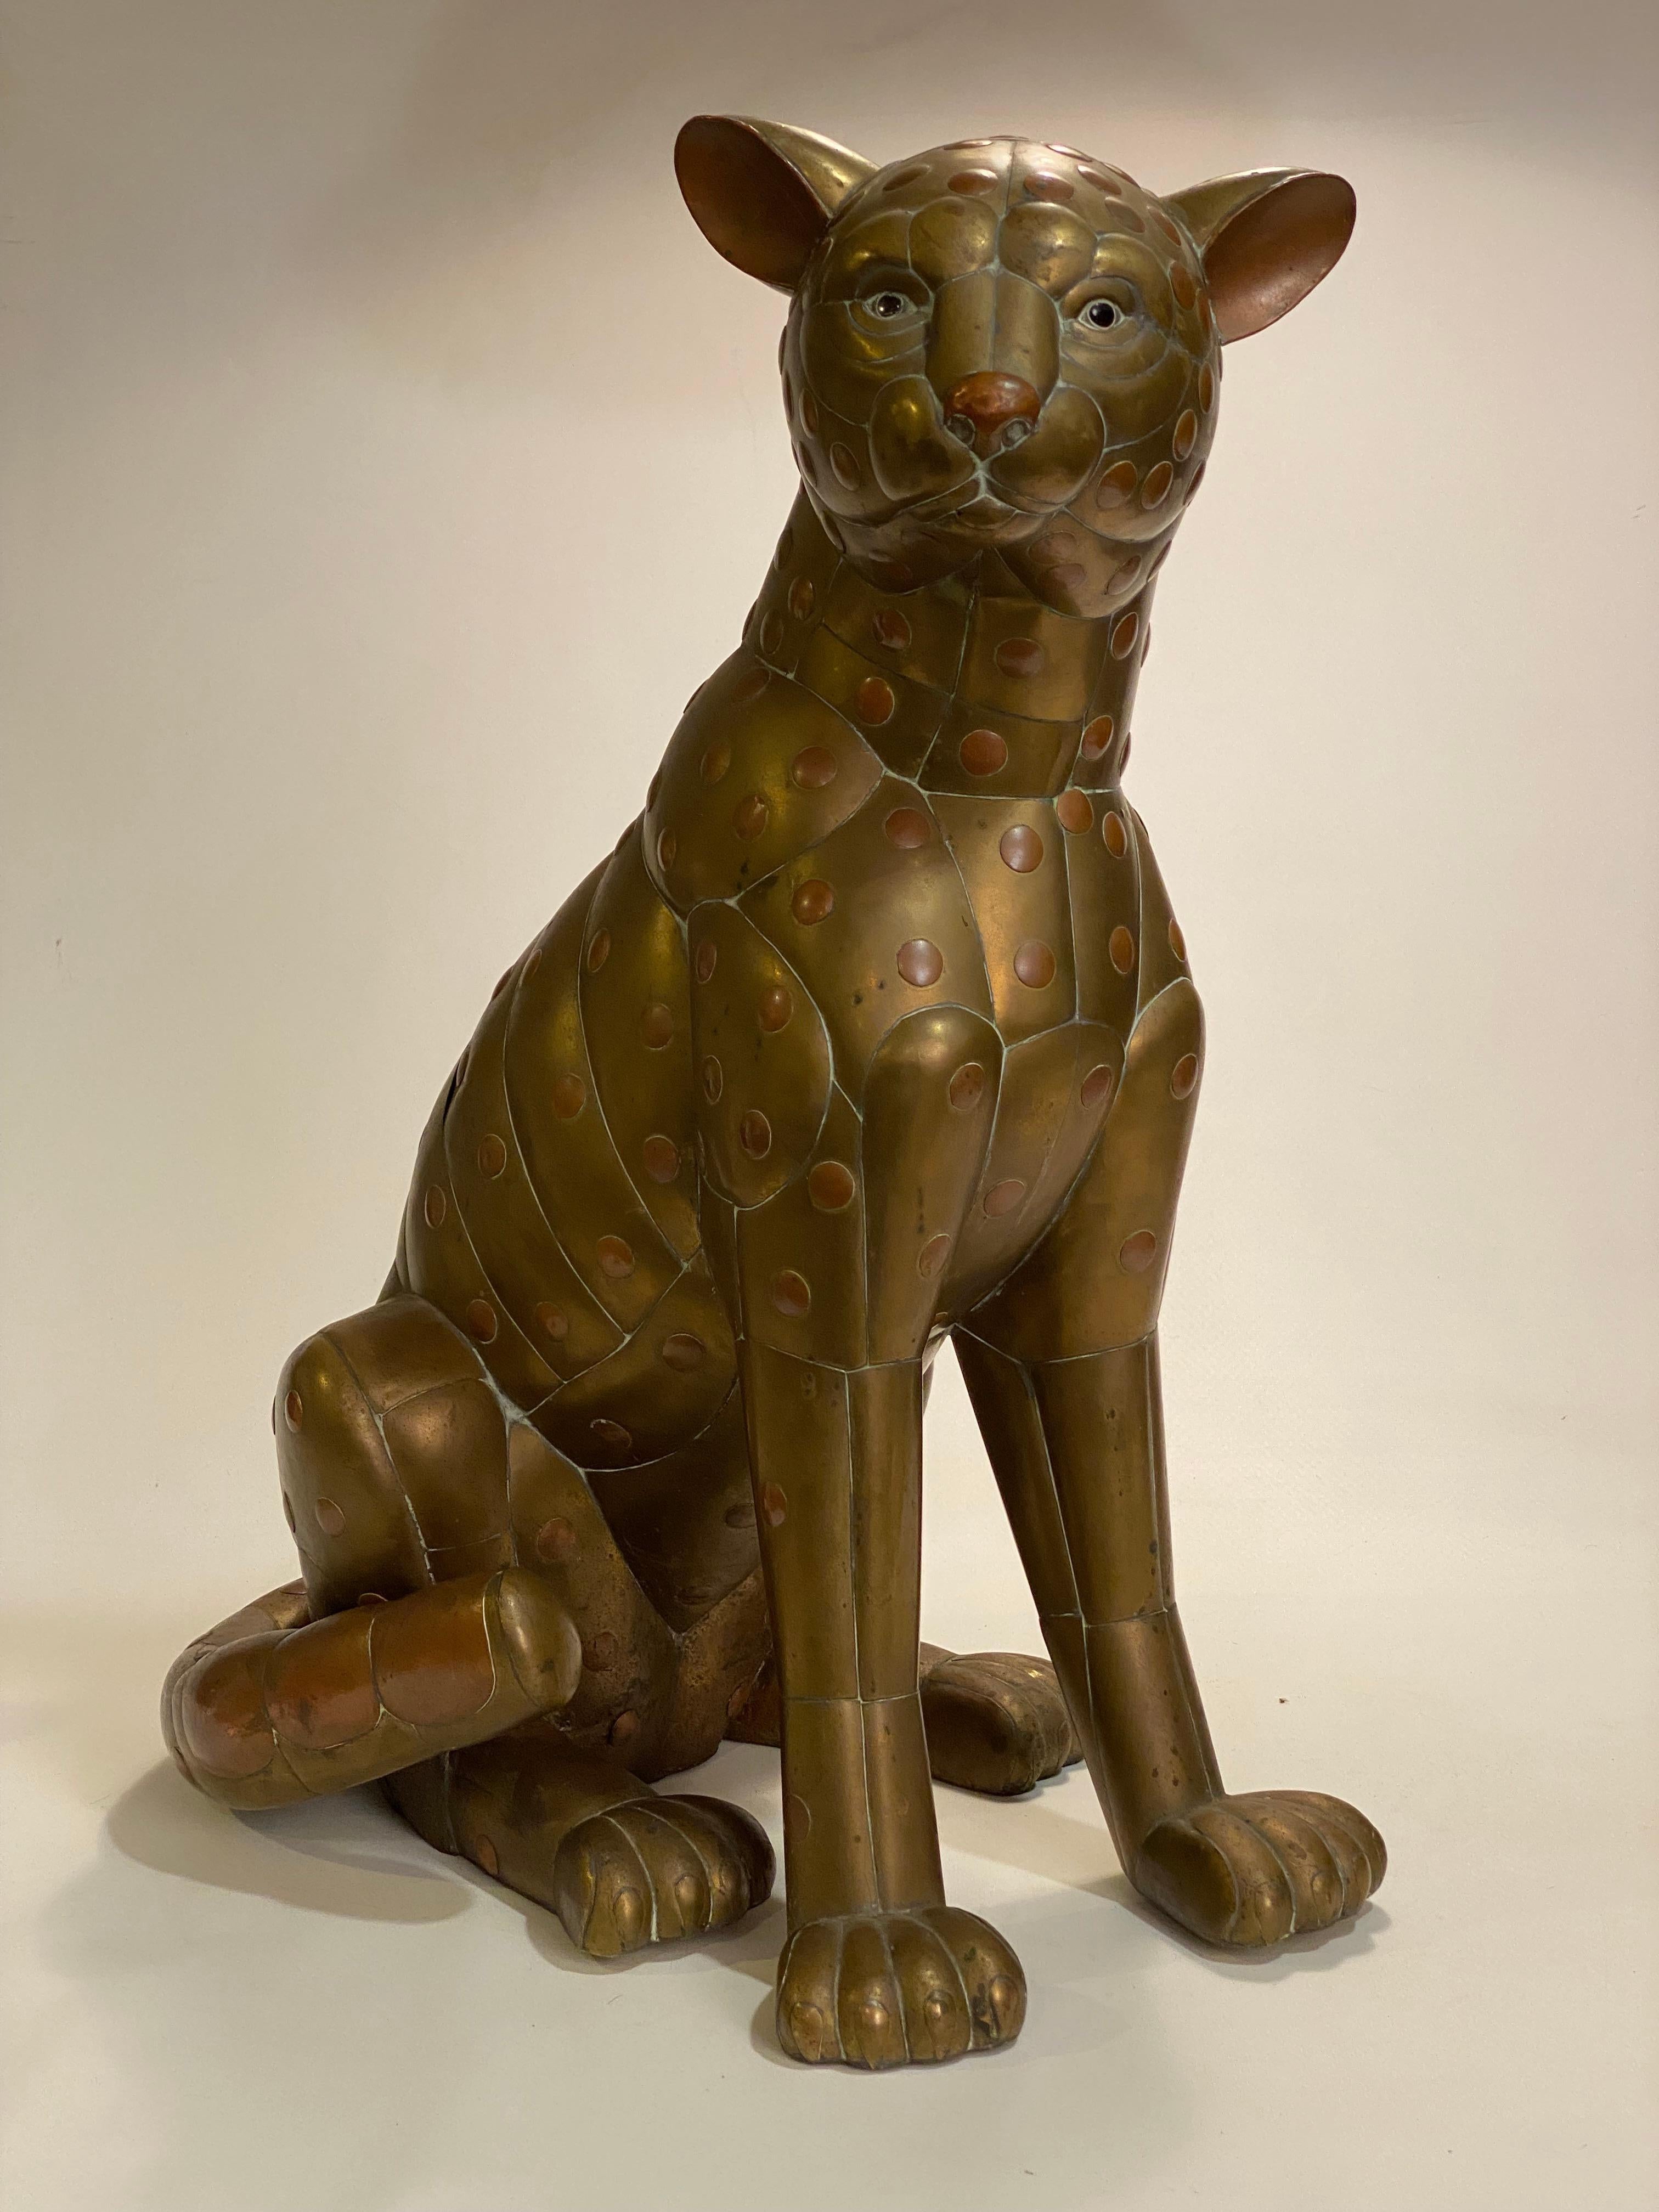 Copper and brass Sergio Bustamante cheetah sculpture. Wonderful attention to detail is the signature to any of Bustamante's animal sculptures. Bustamante and his studio excel at the rendering of feathers or fur, but this piece accentuates the